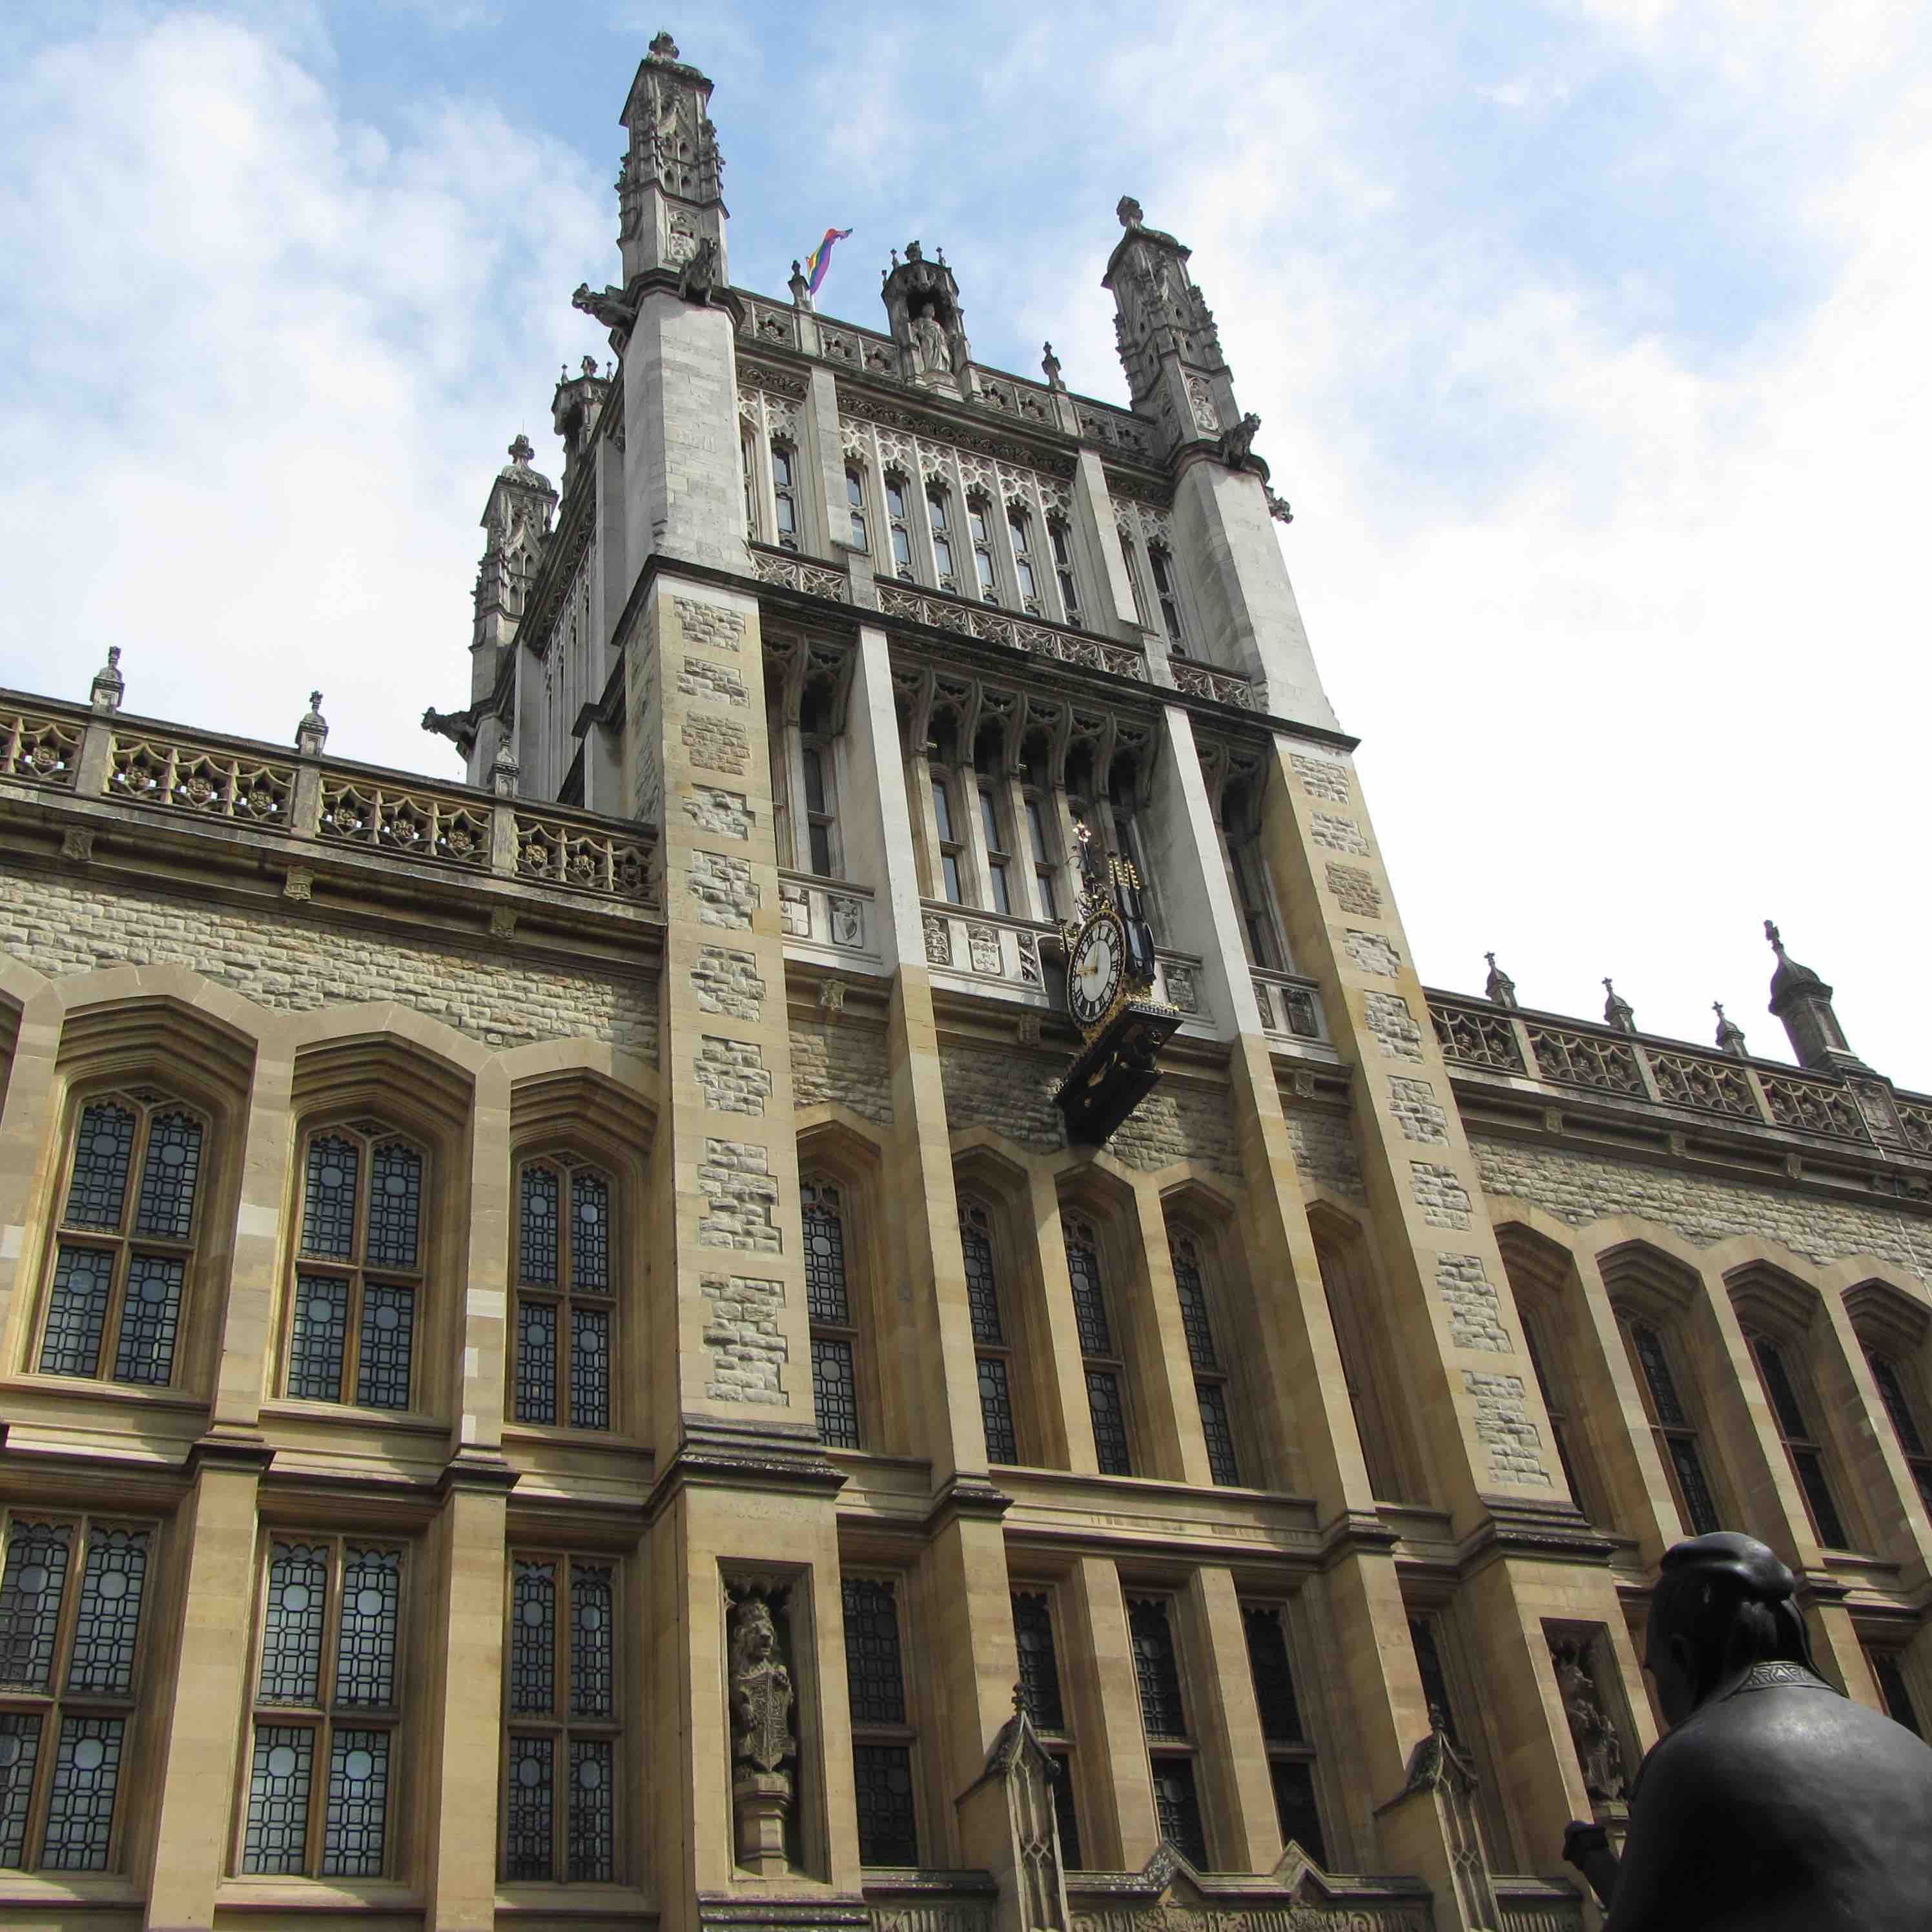 Neo-Gothic Victorian facade of Maughan Library entrance